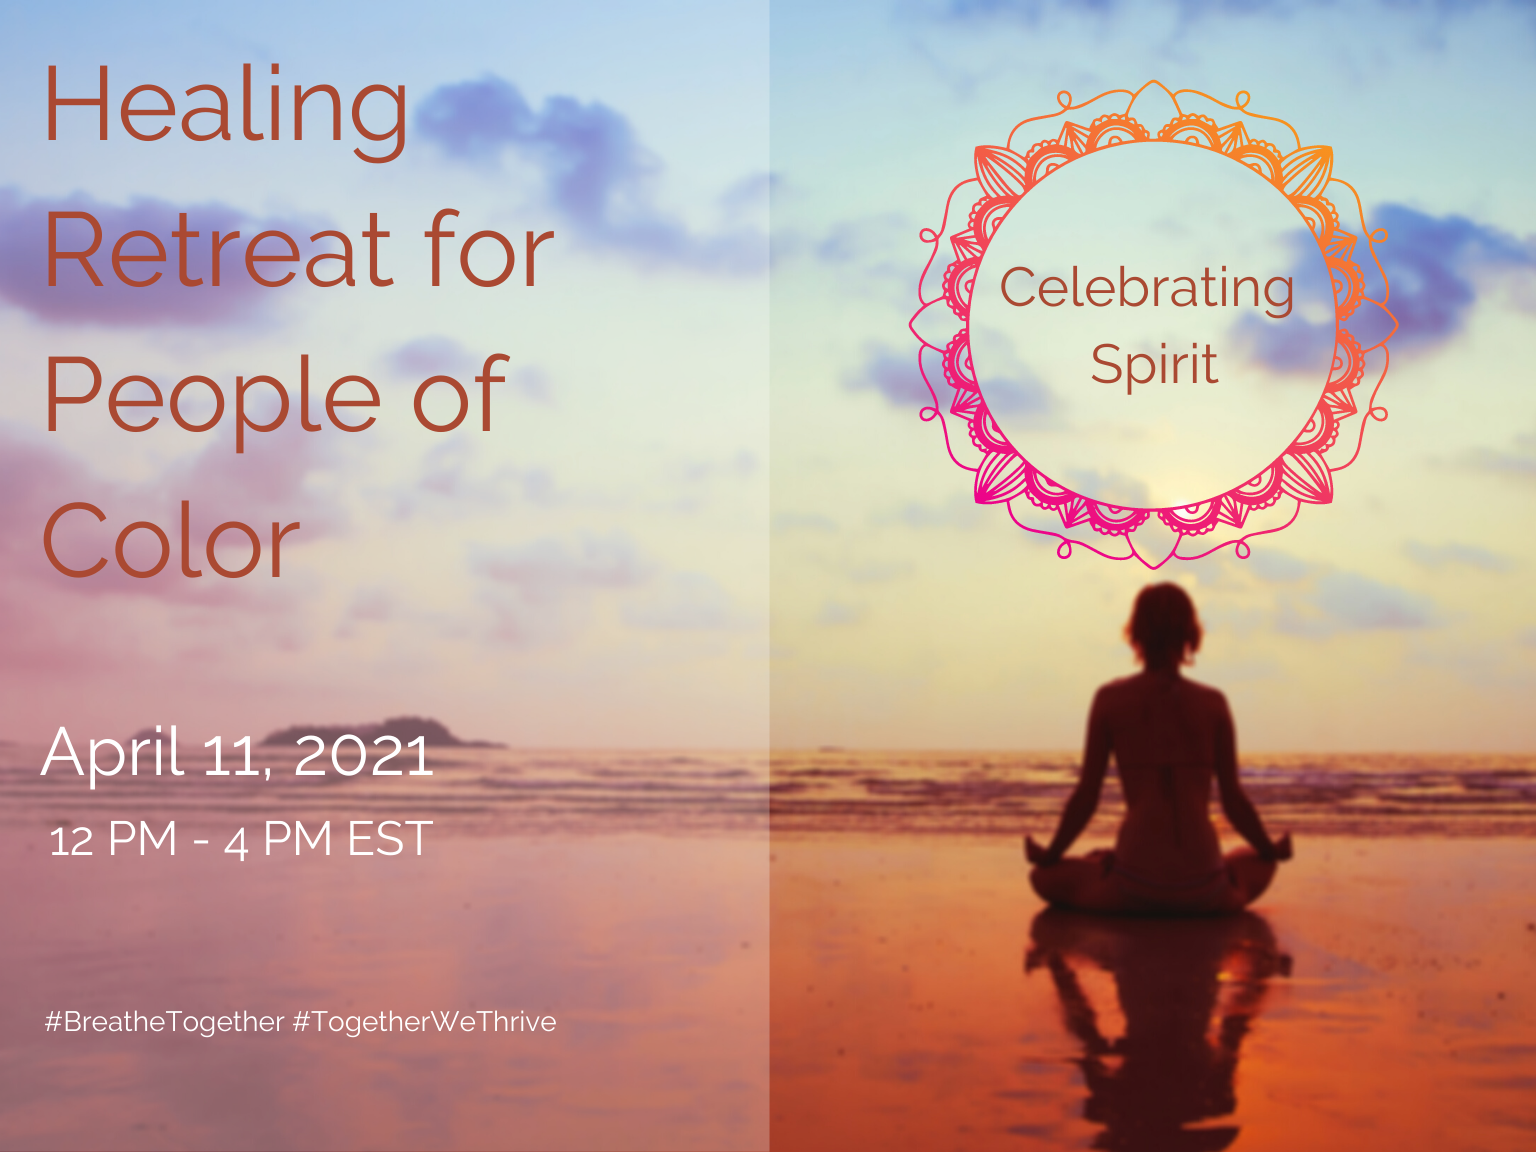 Healing Retreat for People of Color